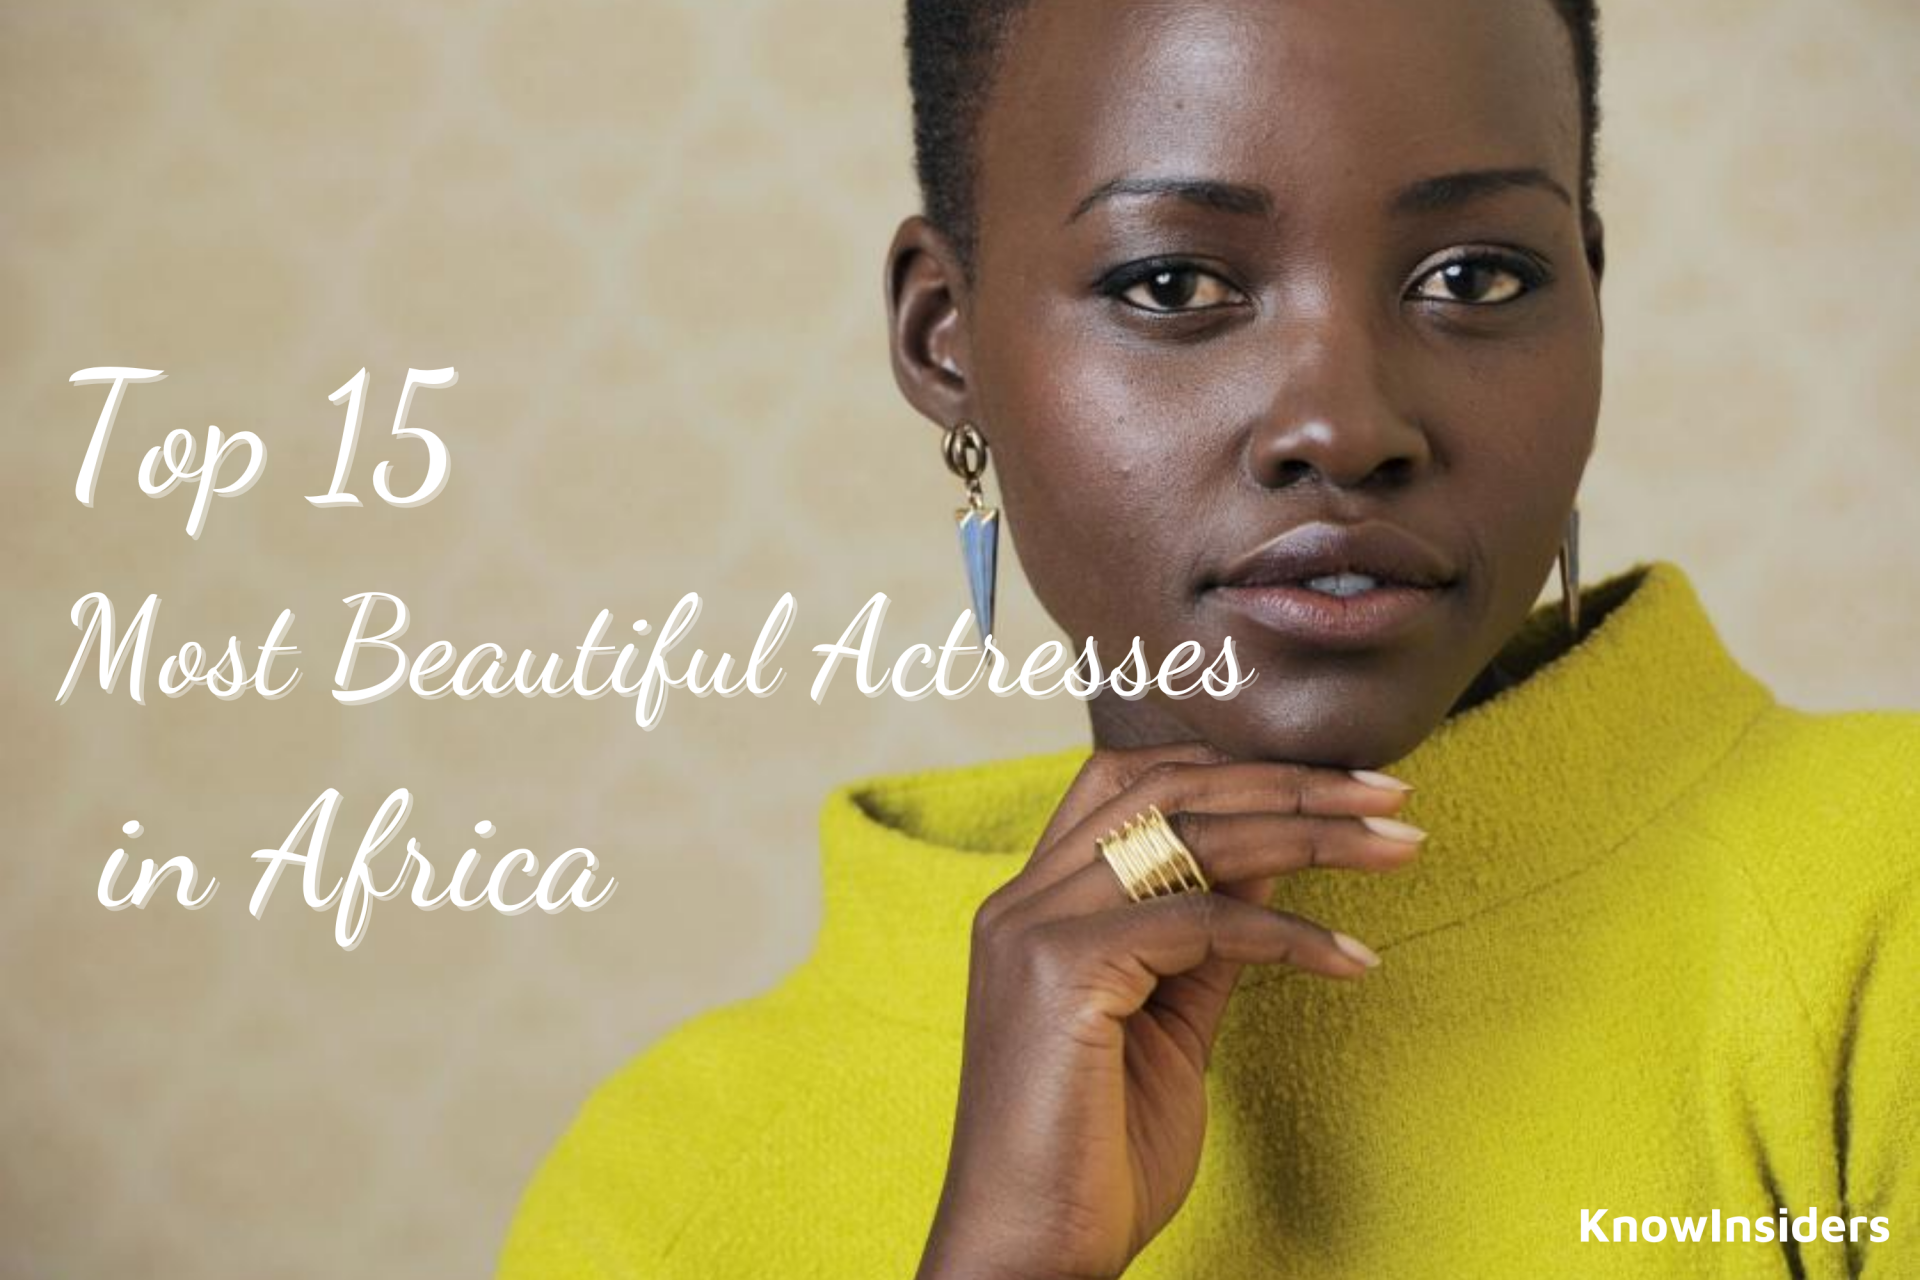 Top 15 Most Beautiful Actresses of Africa